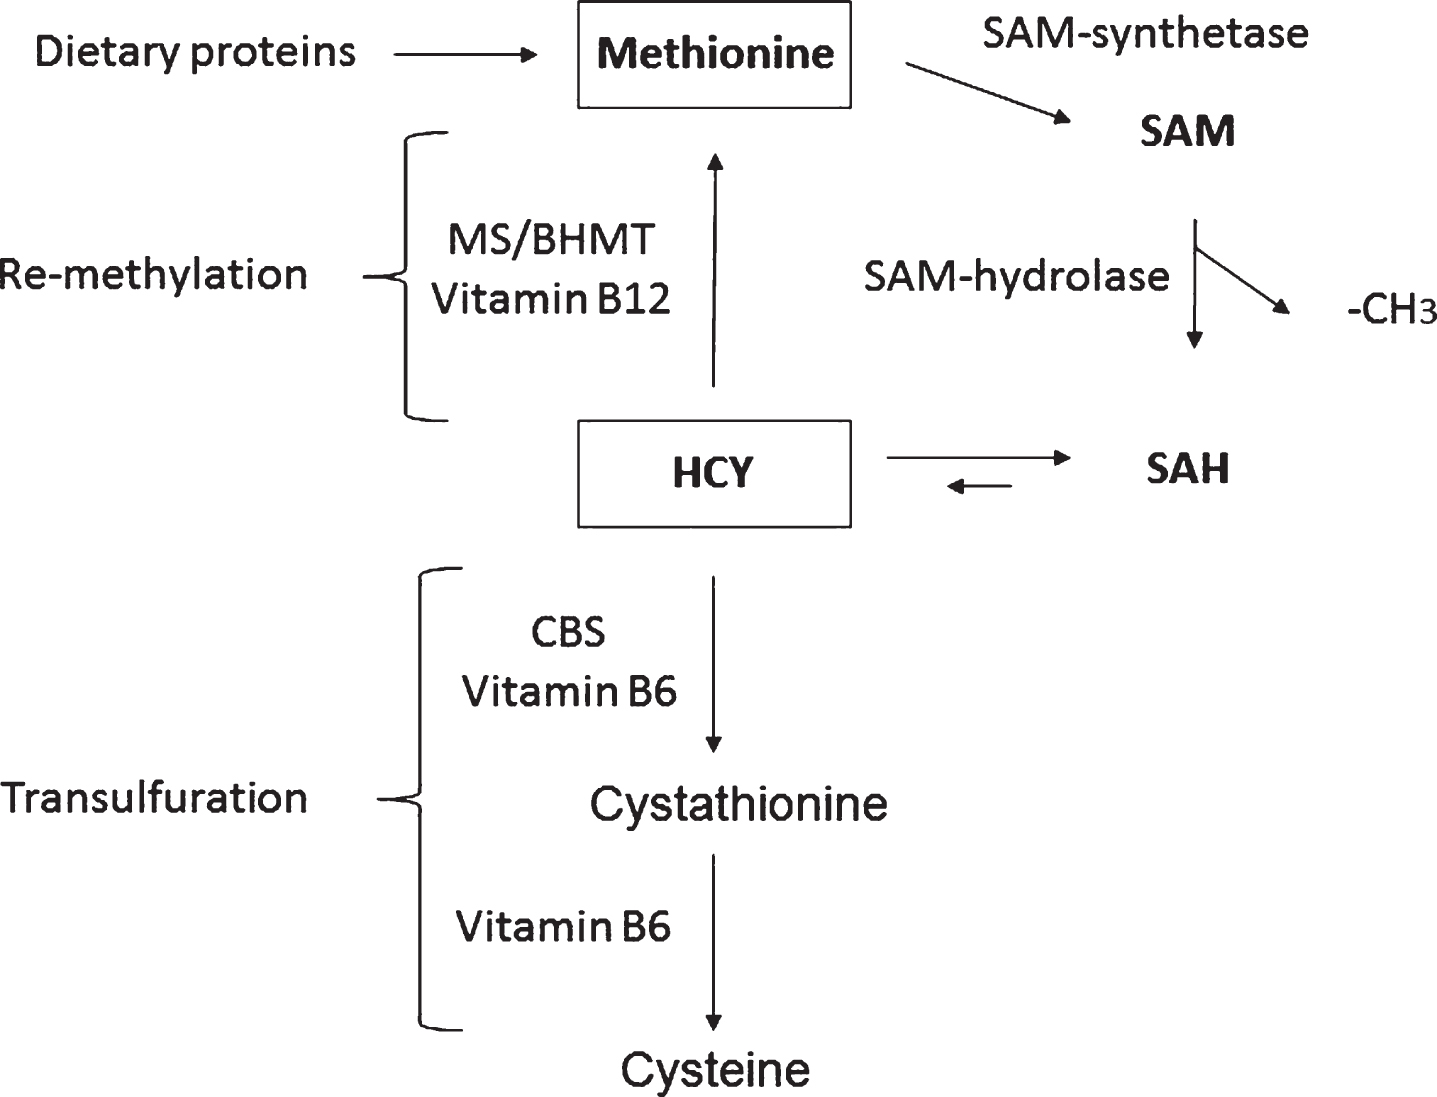 The homocysteine/methionine cycle. S-adenosylmethionine (SAM), S-adenosylhomocysteine (SAH), homocysteine (HCY), methionine synthase (MS), HCY methyltransferase (BHMT), and cystathionine beta-synthase (CBS).